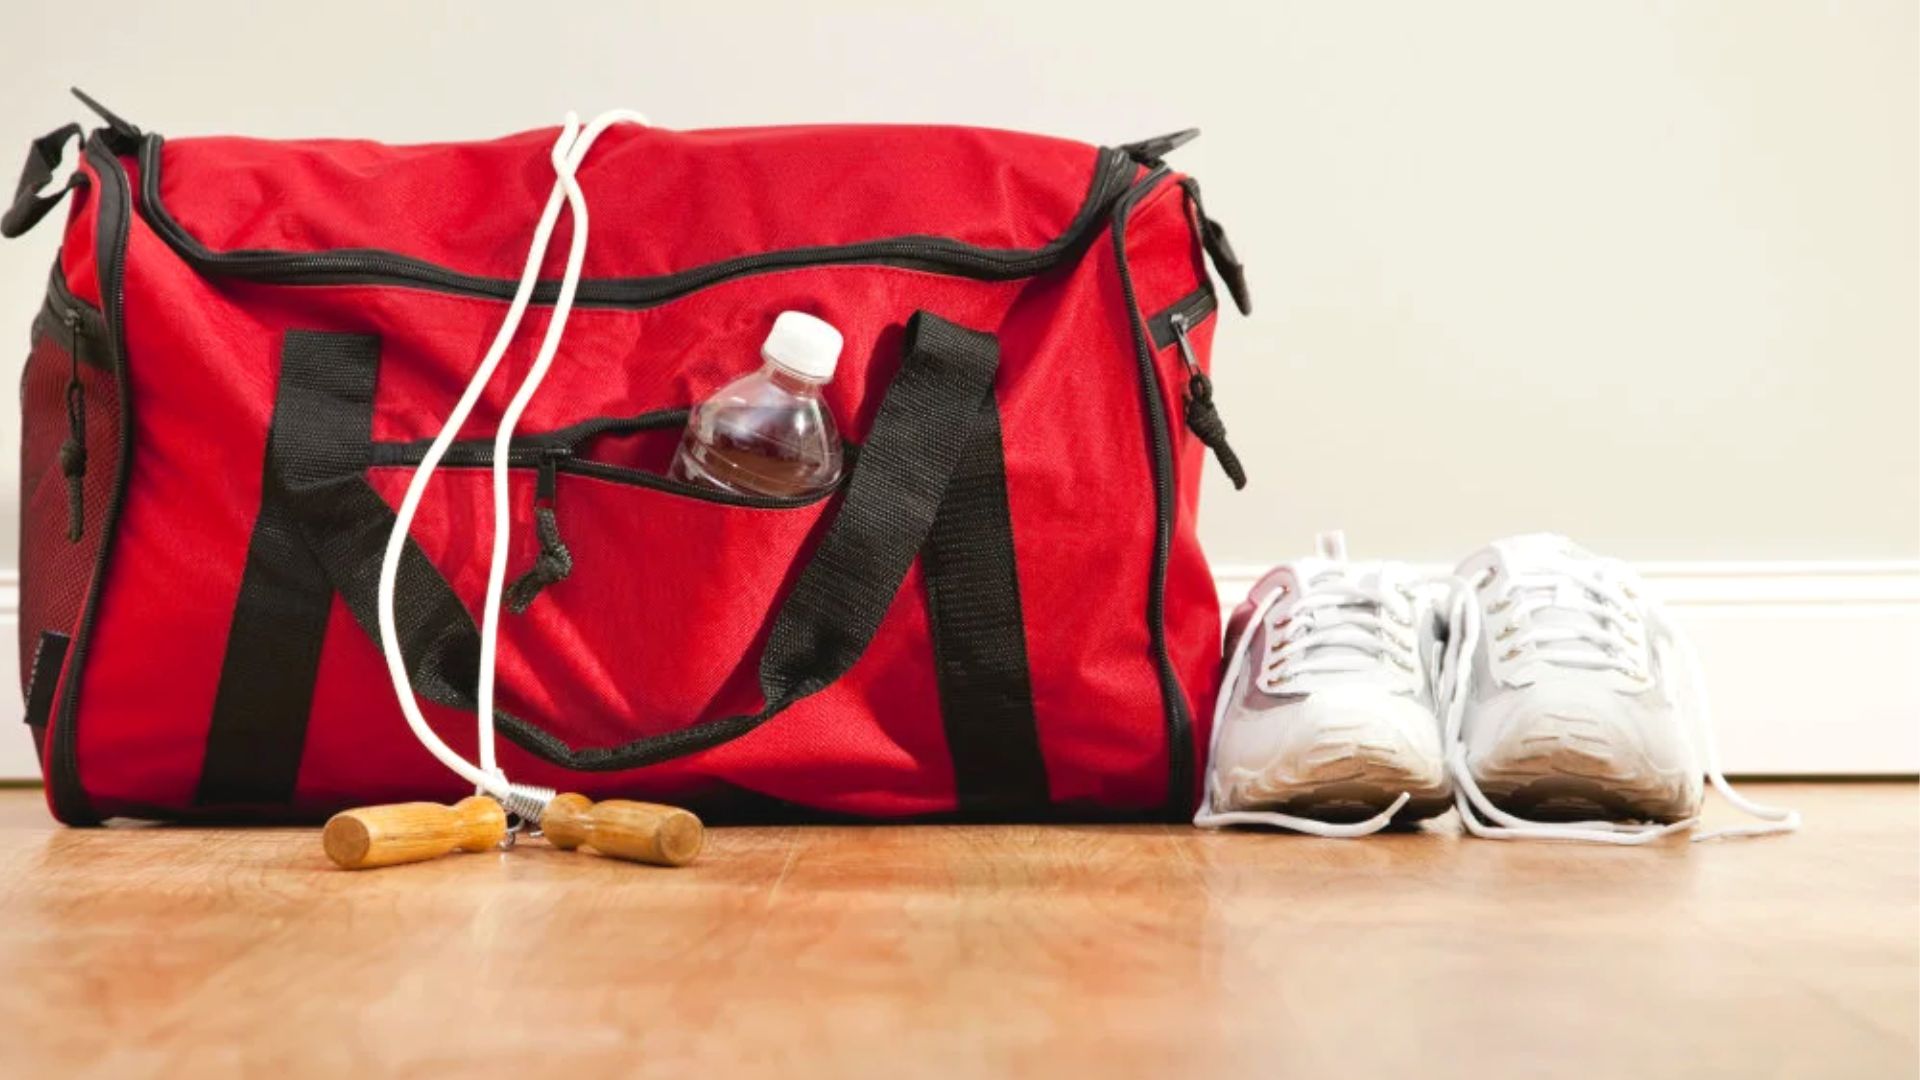 Red Gym Bag With Skipping Rope And Shoes